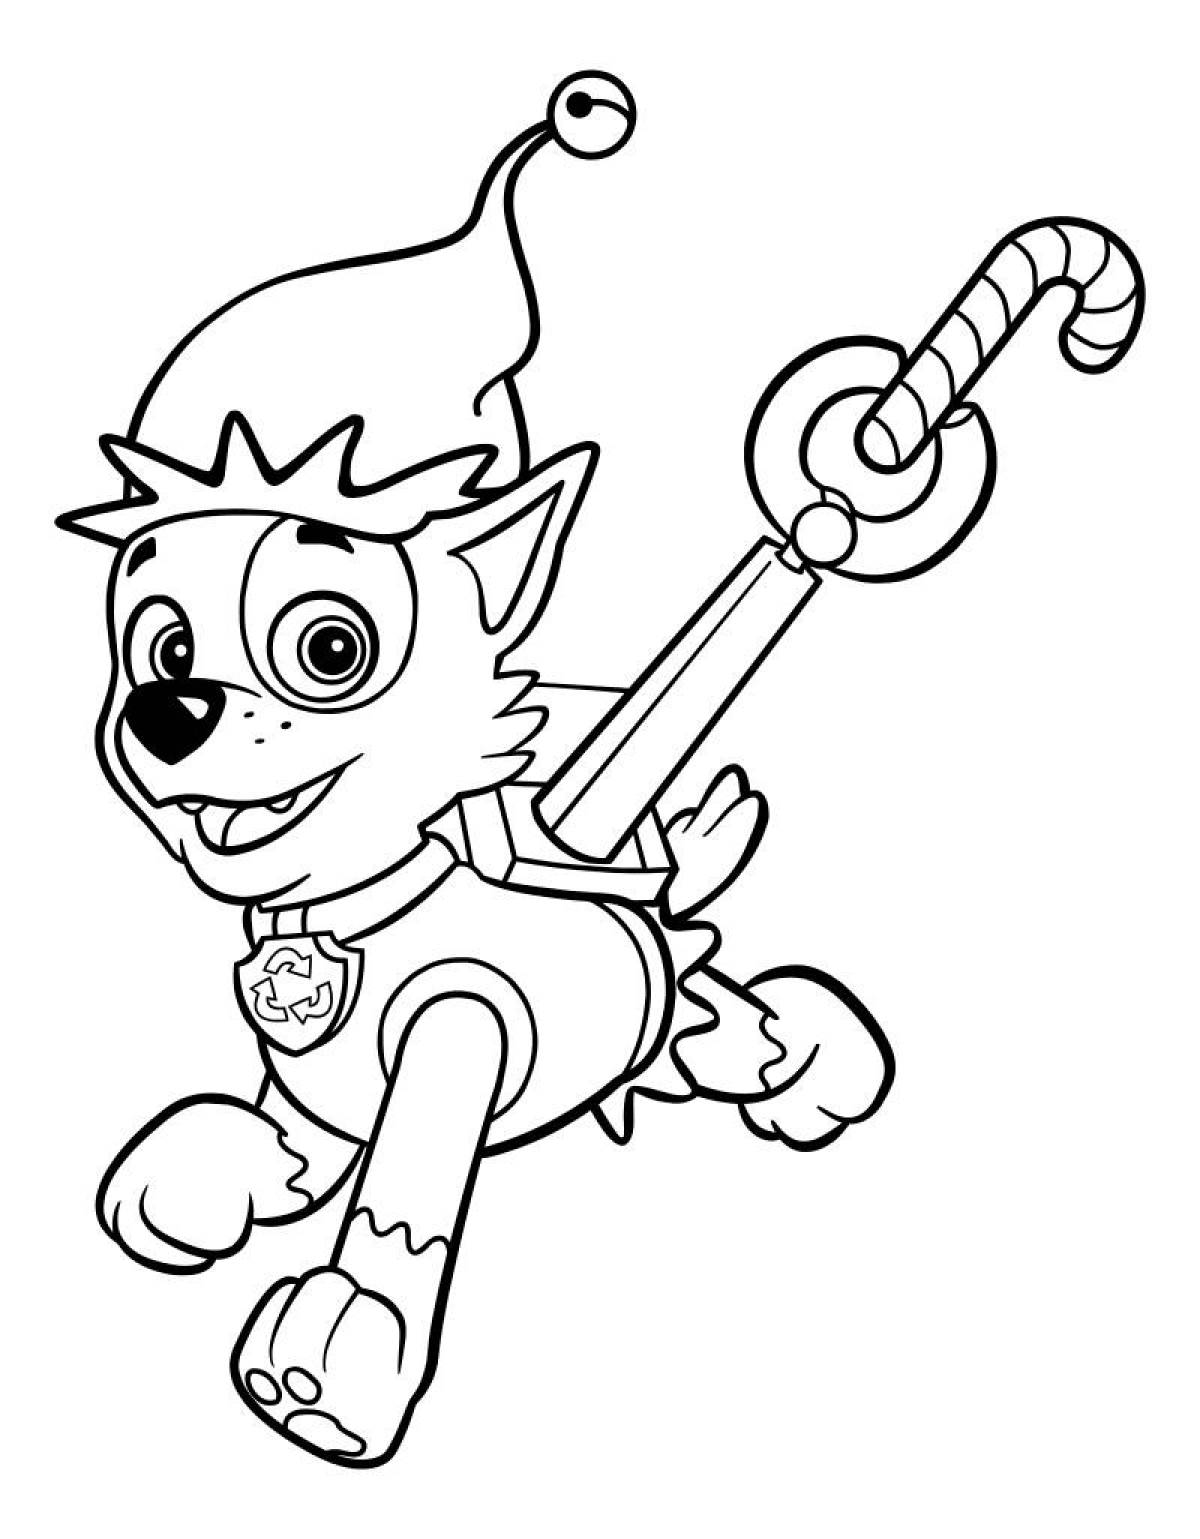 Rocky paw patrol coloring page